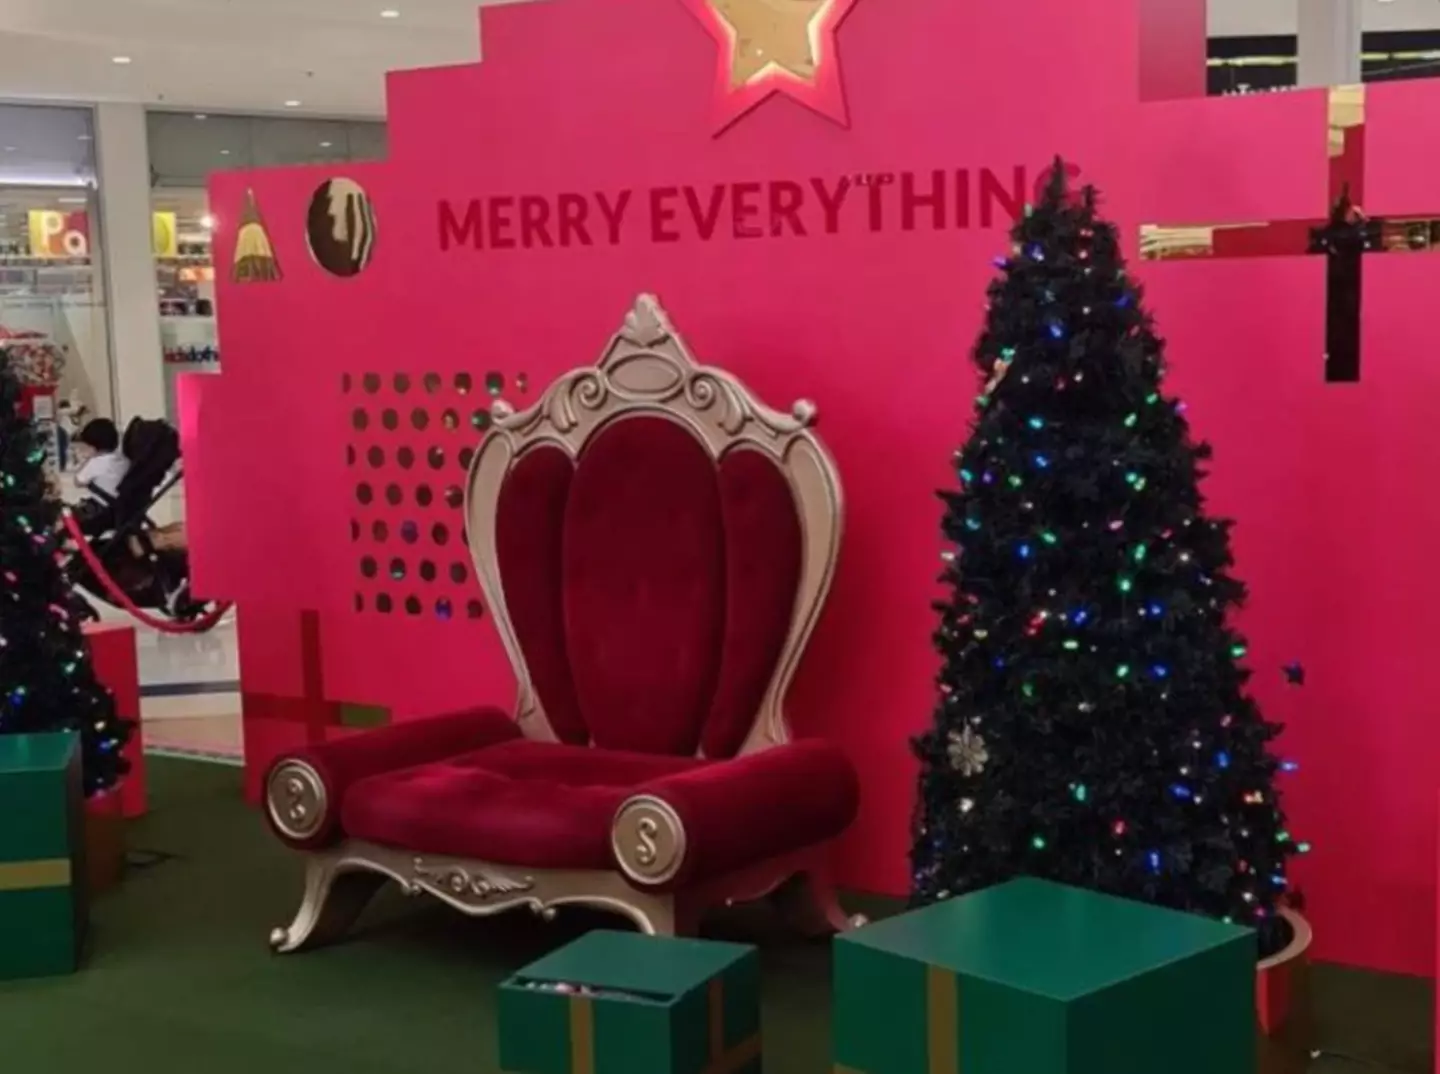 Many shoppers were unhappy with the decoration that read "Merry Everything" instead of "Merry Christmas".